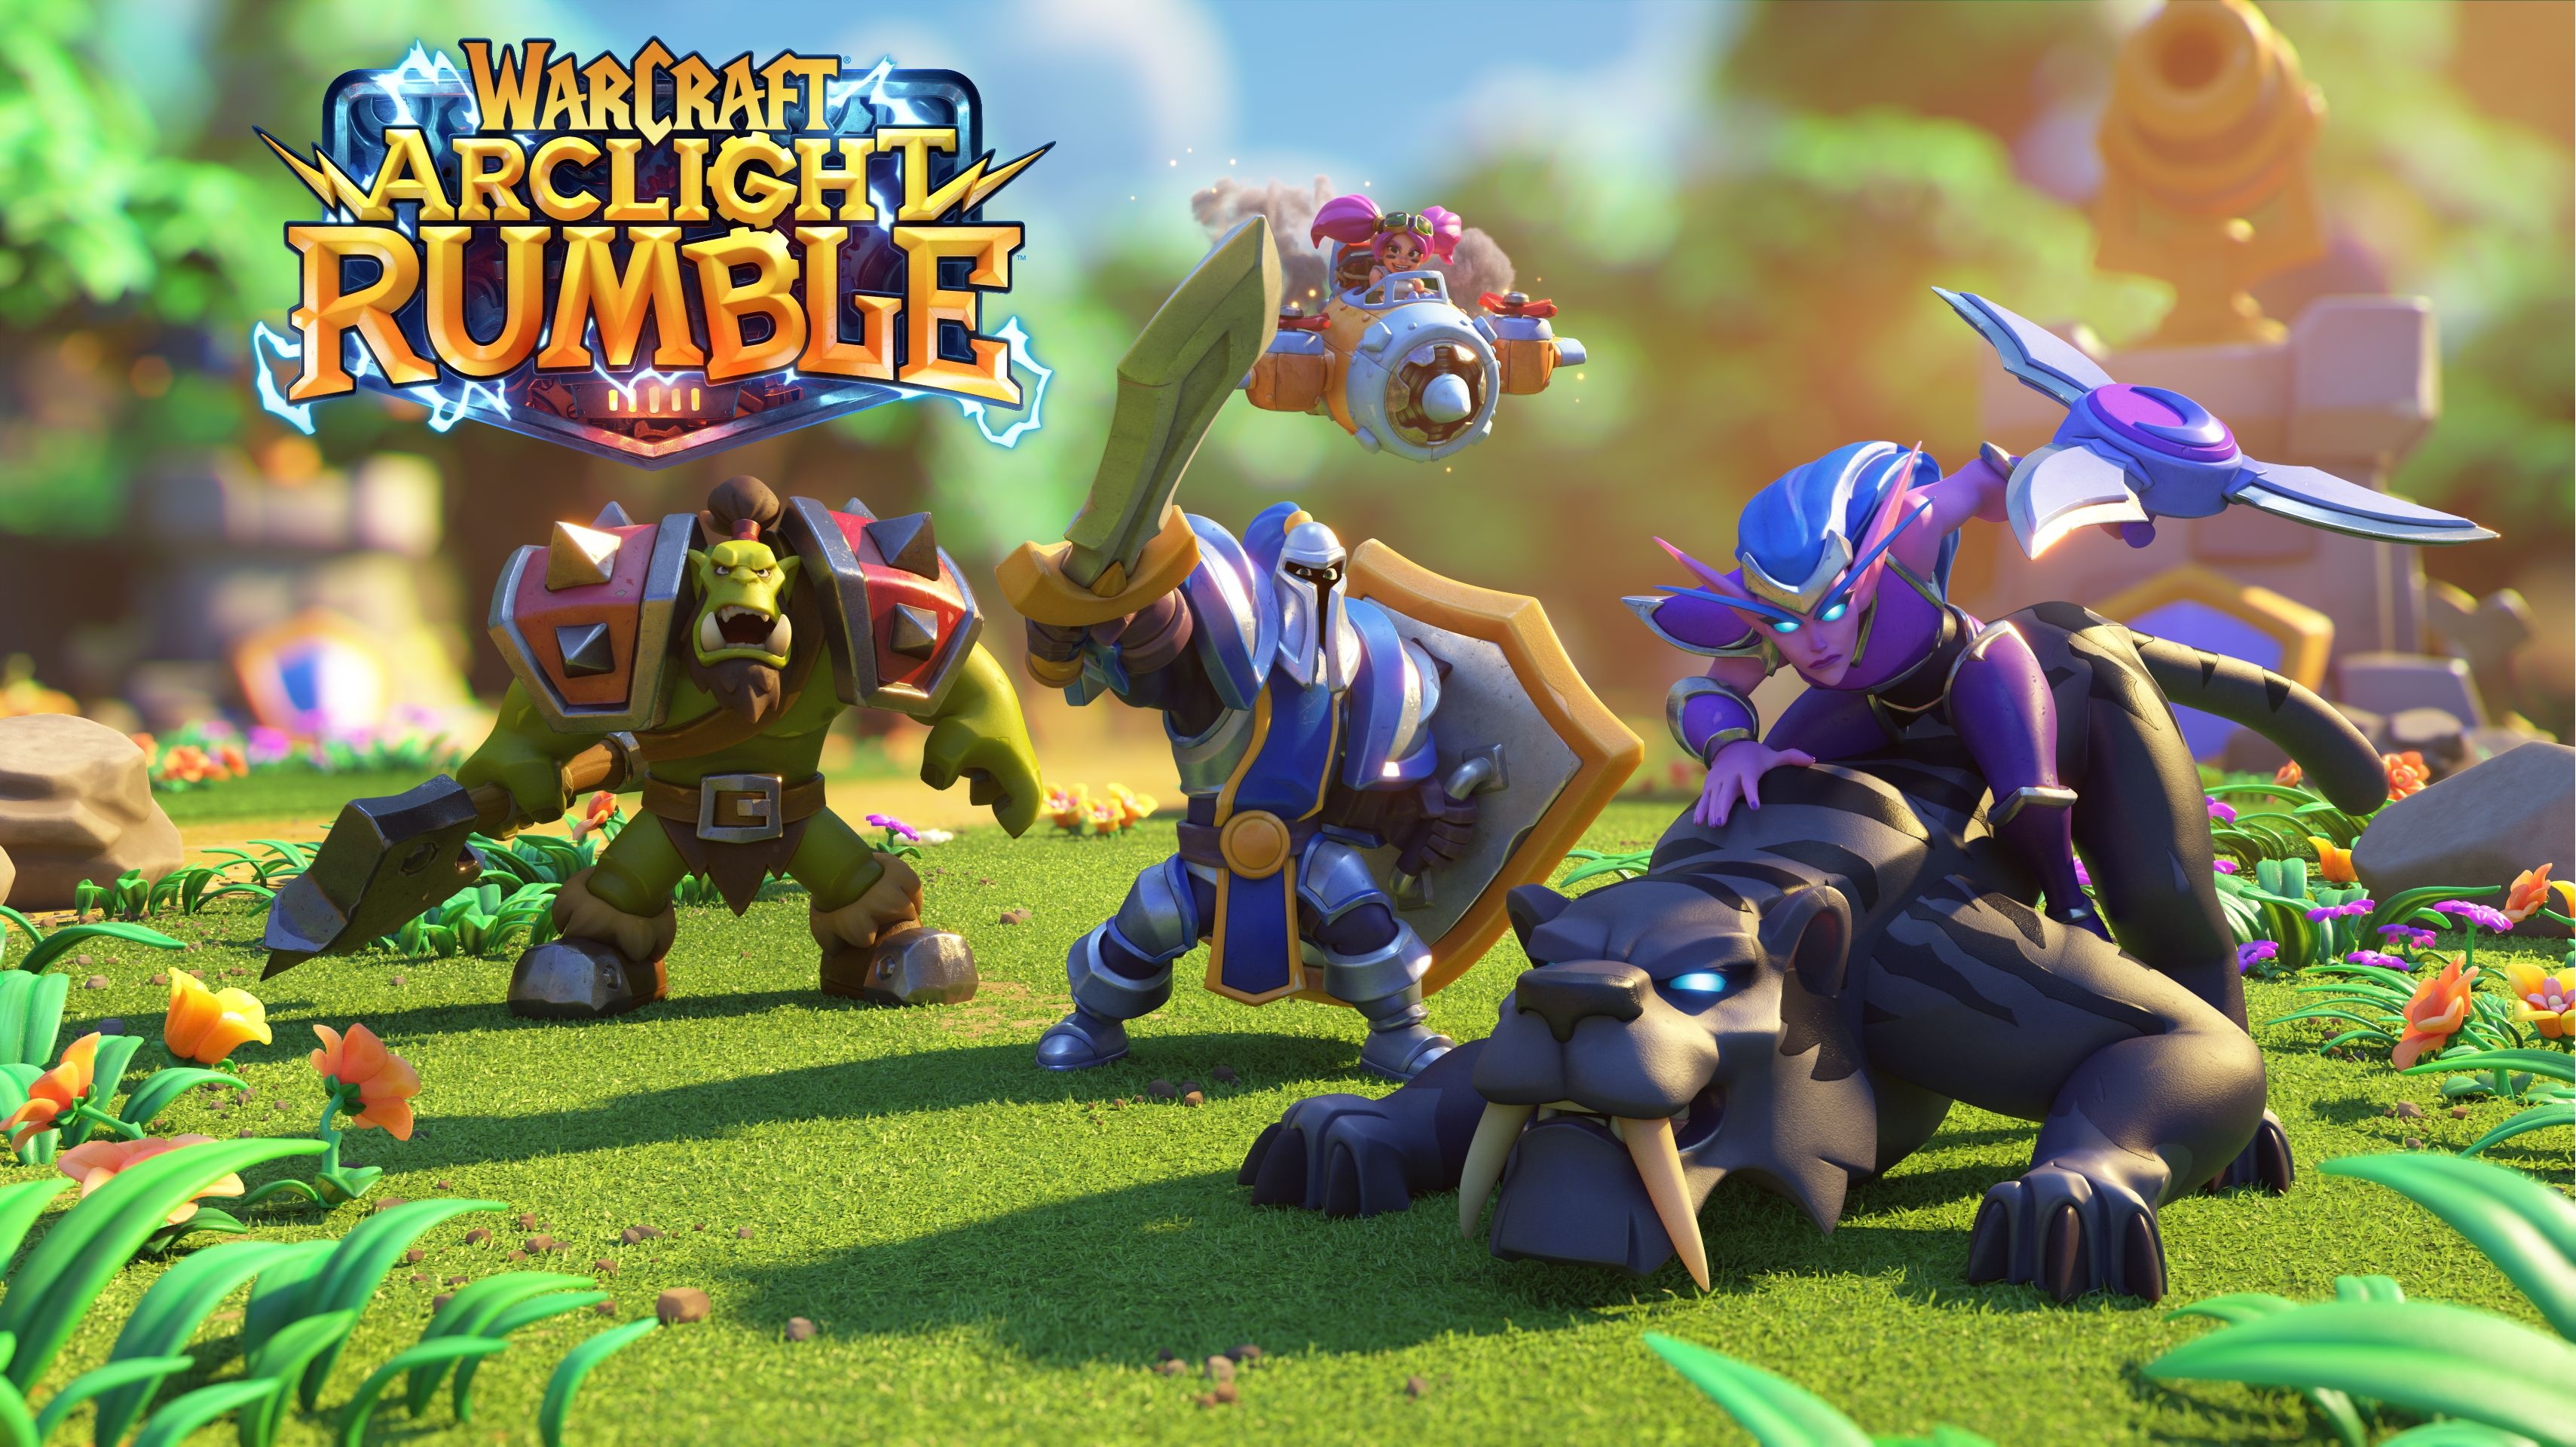 Warcraft Arclight Rumble: New RTS for mobile from Blizzard, Tower defense, Strategy, Action. 3420x1920 HD Background.